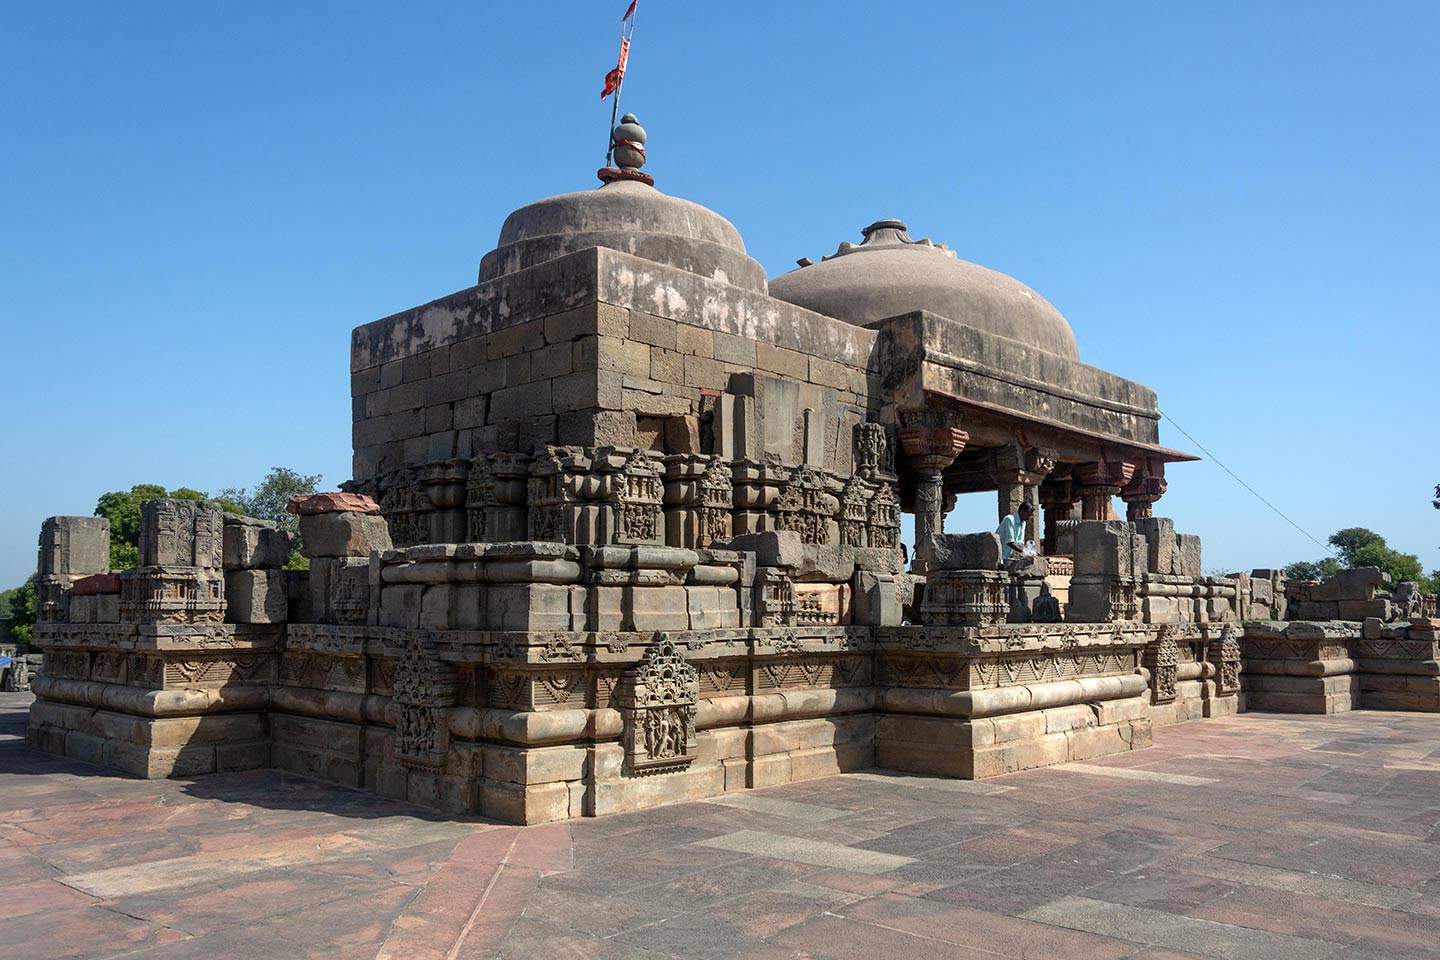 The jagati has two projected niches on the south and north sides and a single projected niche on the west side. The dome pedestal and the domes on top of the mandapa (pillared hall) and the garbhagriha (sanctum) are made of concrete instead of stone, which is used in the rest of the temple structure. The open space surrounding the jagati is the pradakshina path (circumambulation path) on the adhisthana.